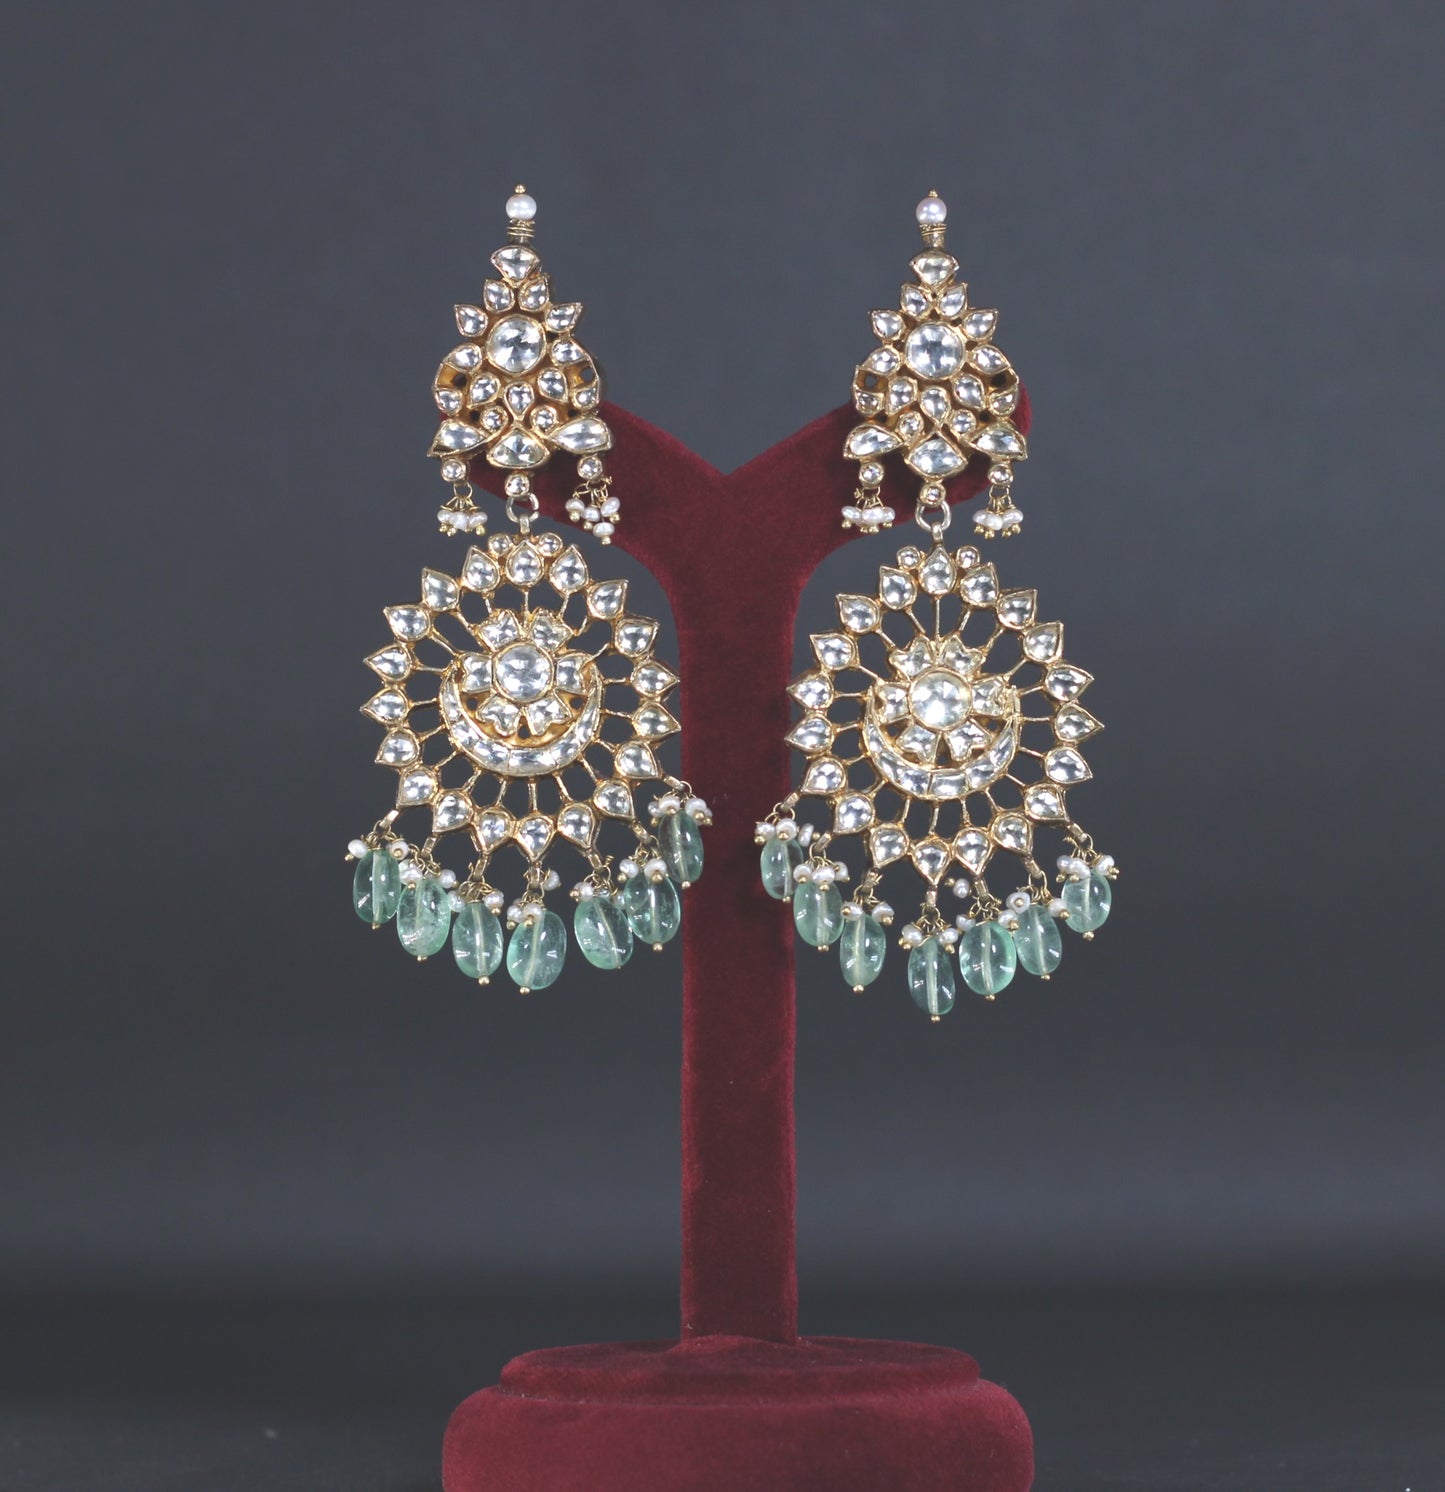 EARRINGS in 92.5 STERLING SILVER WITH 18KT GOLD PLATED ,POLKI AND FLUORIDE stones WITH FRESH WATER PEARLS